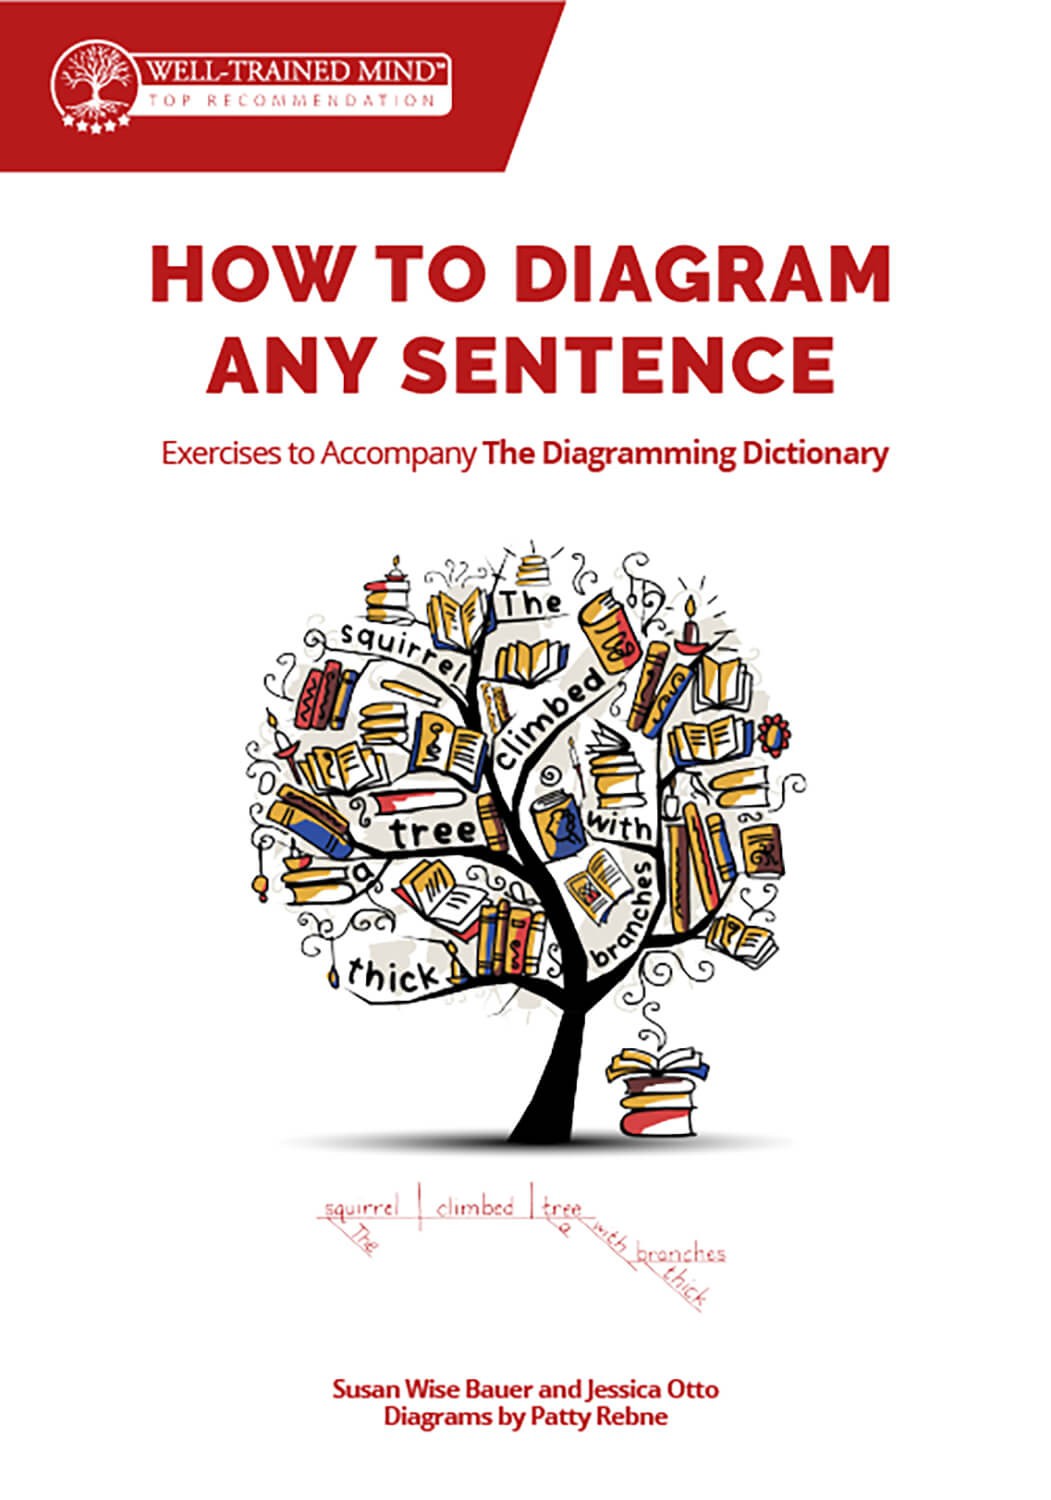 How to Diagram Any Sentence: Exercises to Accompany The Diagramming Dictionary